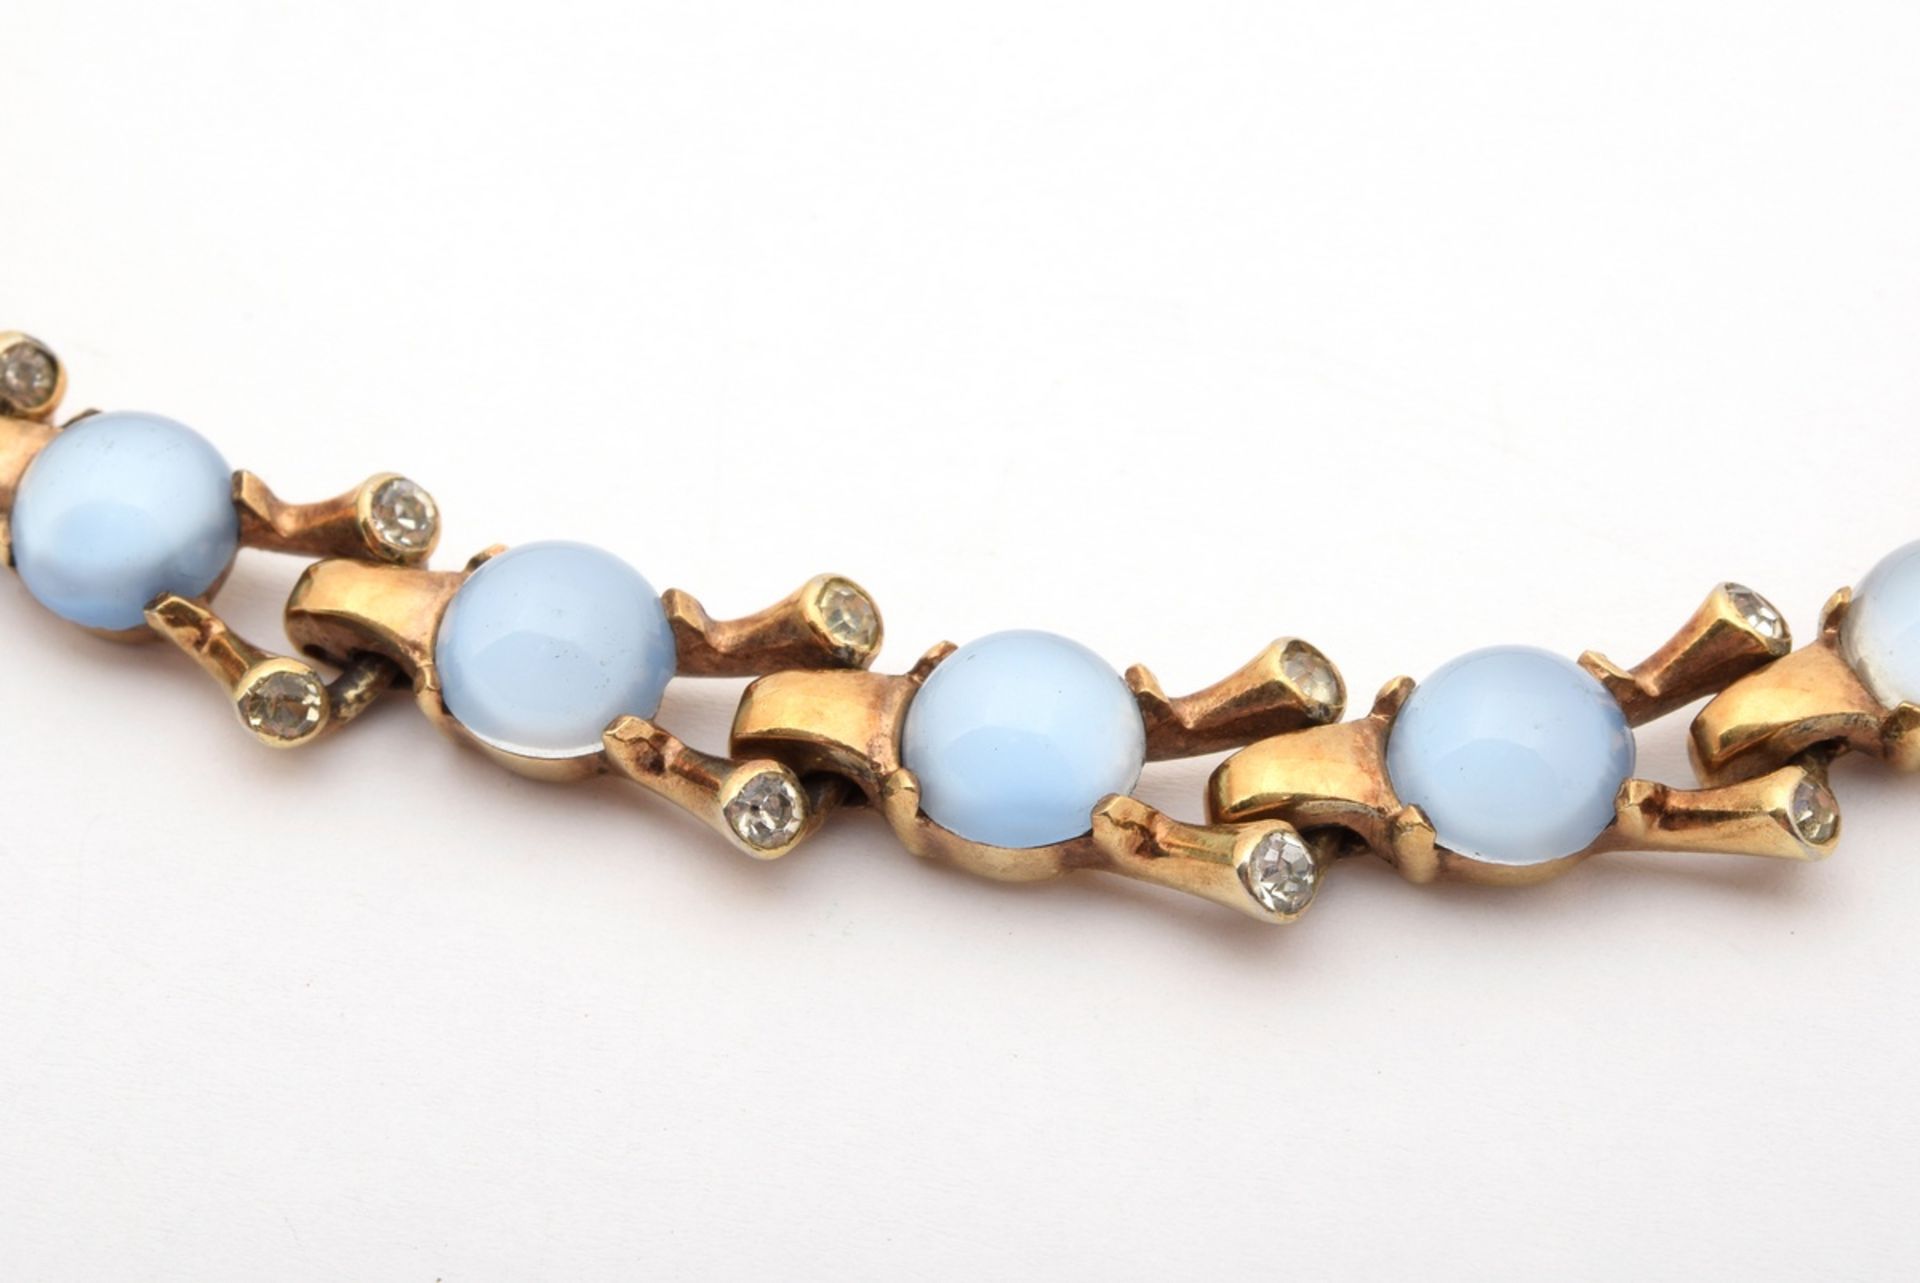 6 pieces of gold-plated light blue/beige fashion/costume jewellery made of glass and artificial pea - Image 11 of 12